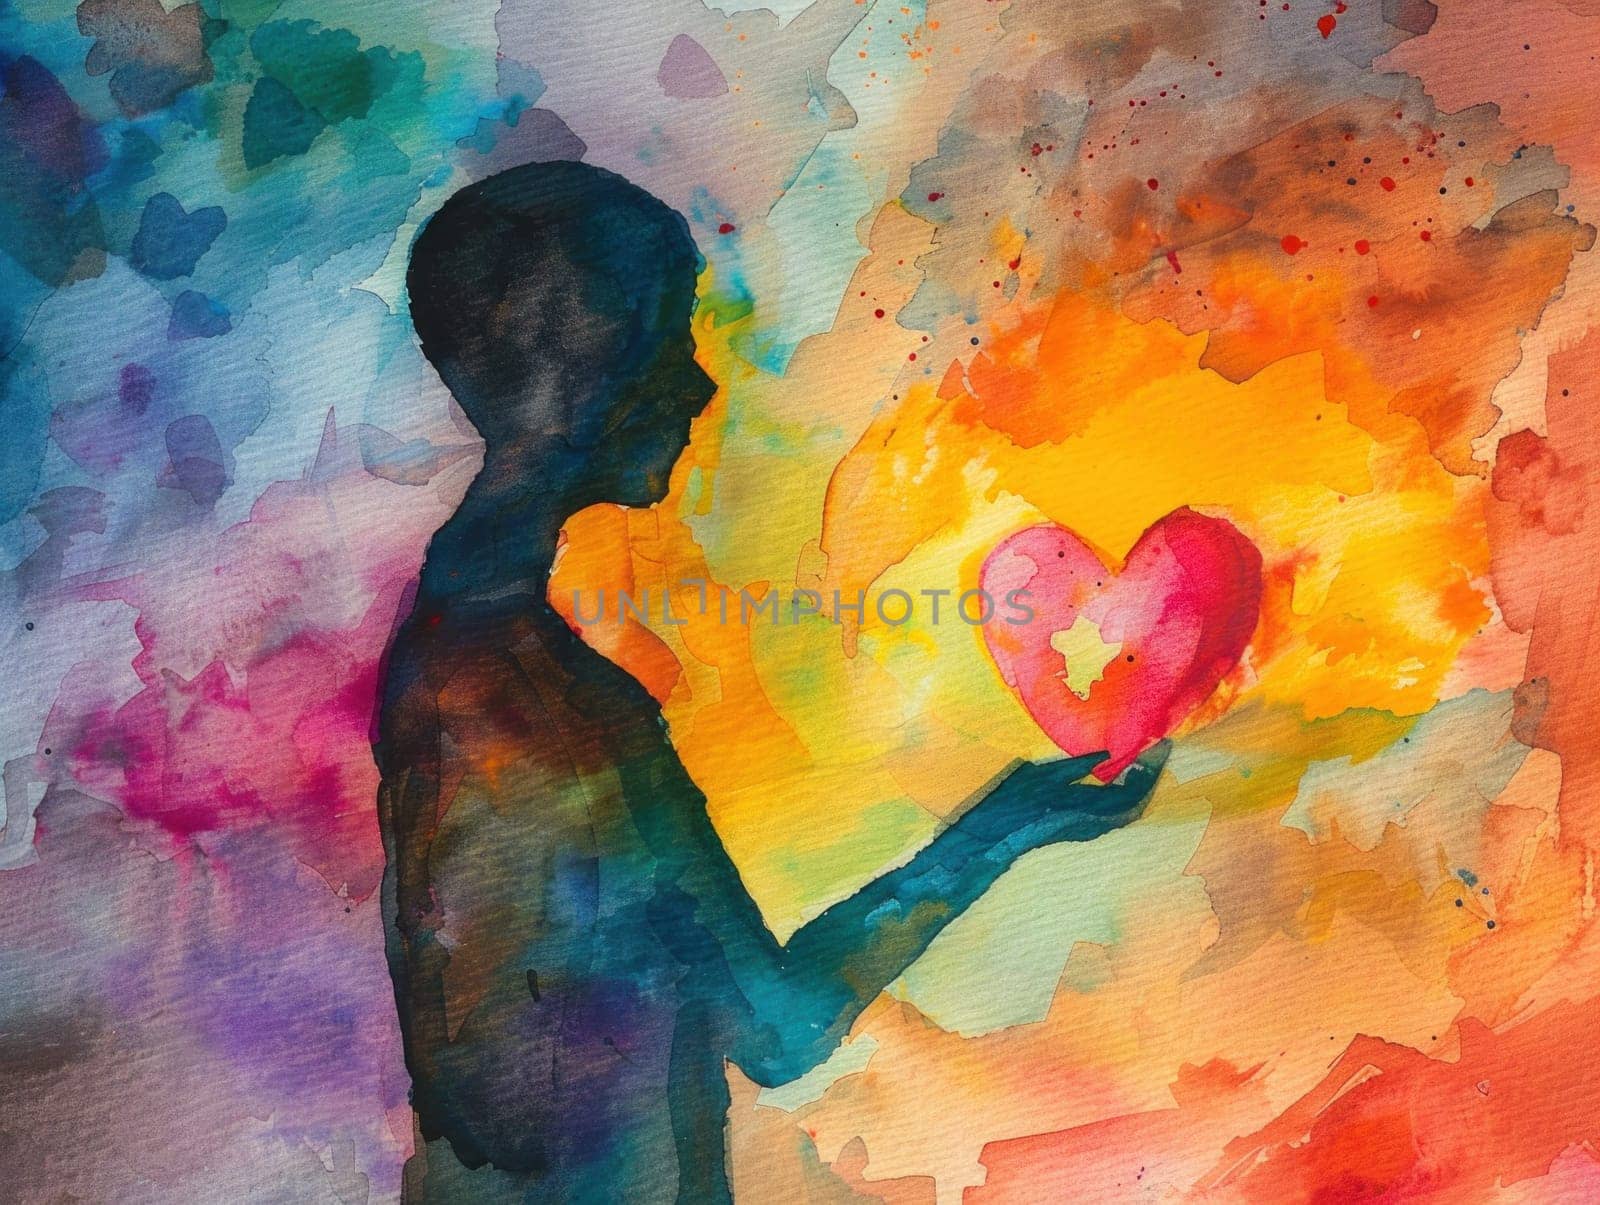 Watercolor painting of a person holding a heart in front of a colorful background as symbol of love and artistry